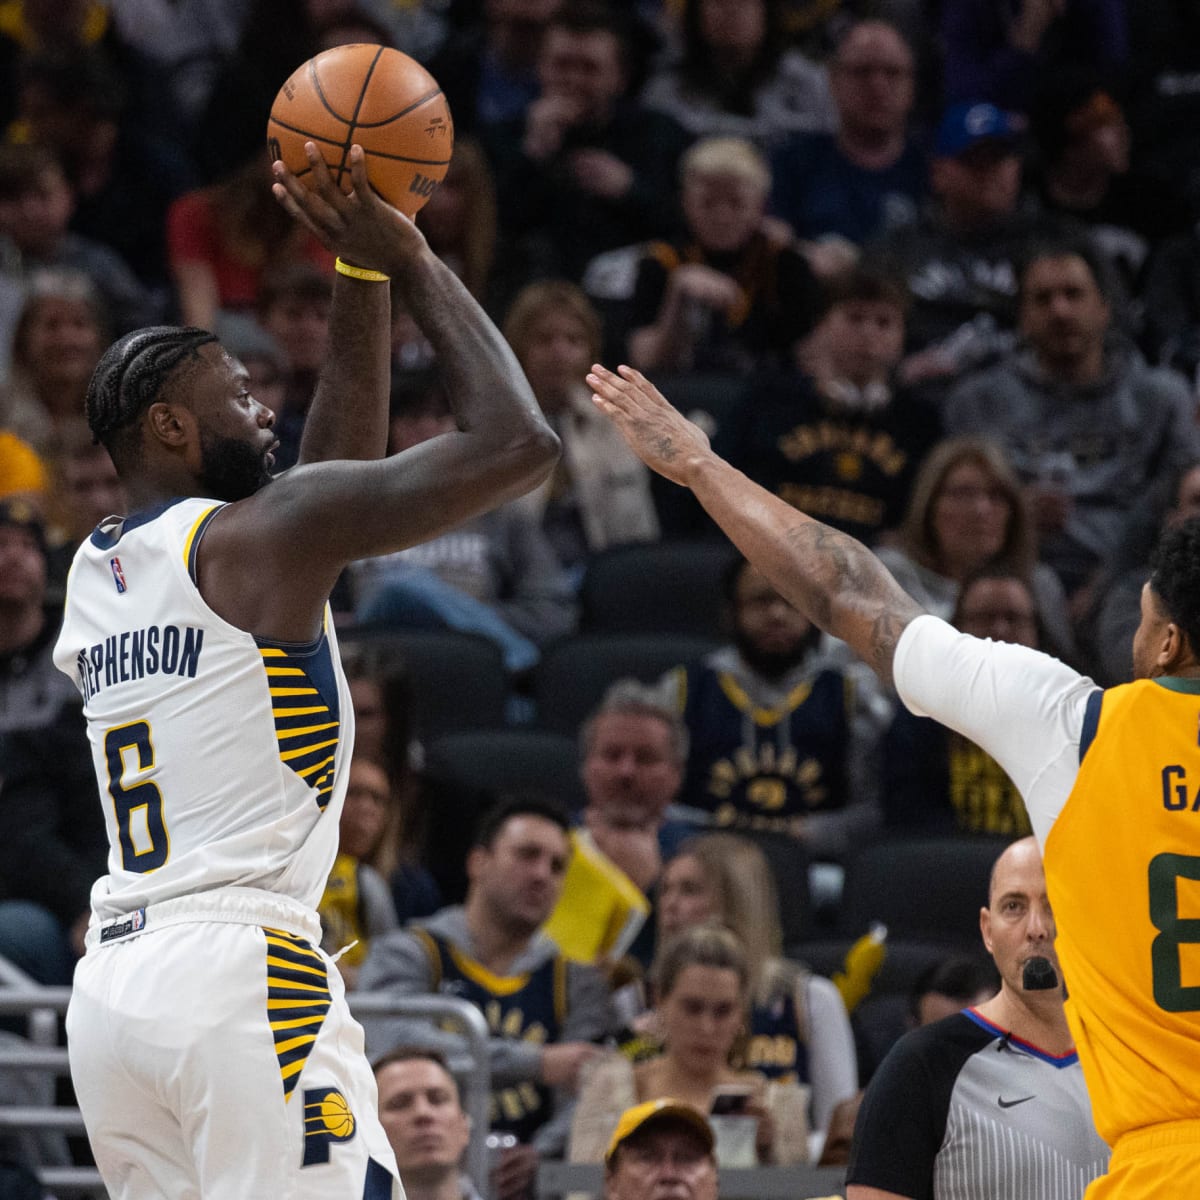 Can the Indiana Pacers re-sign Lance Stephenson for 2022-23? : r/pacers